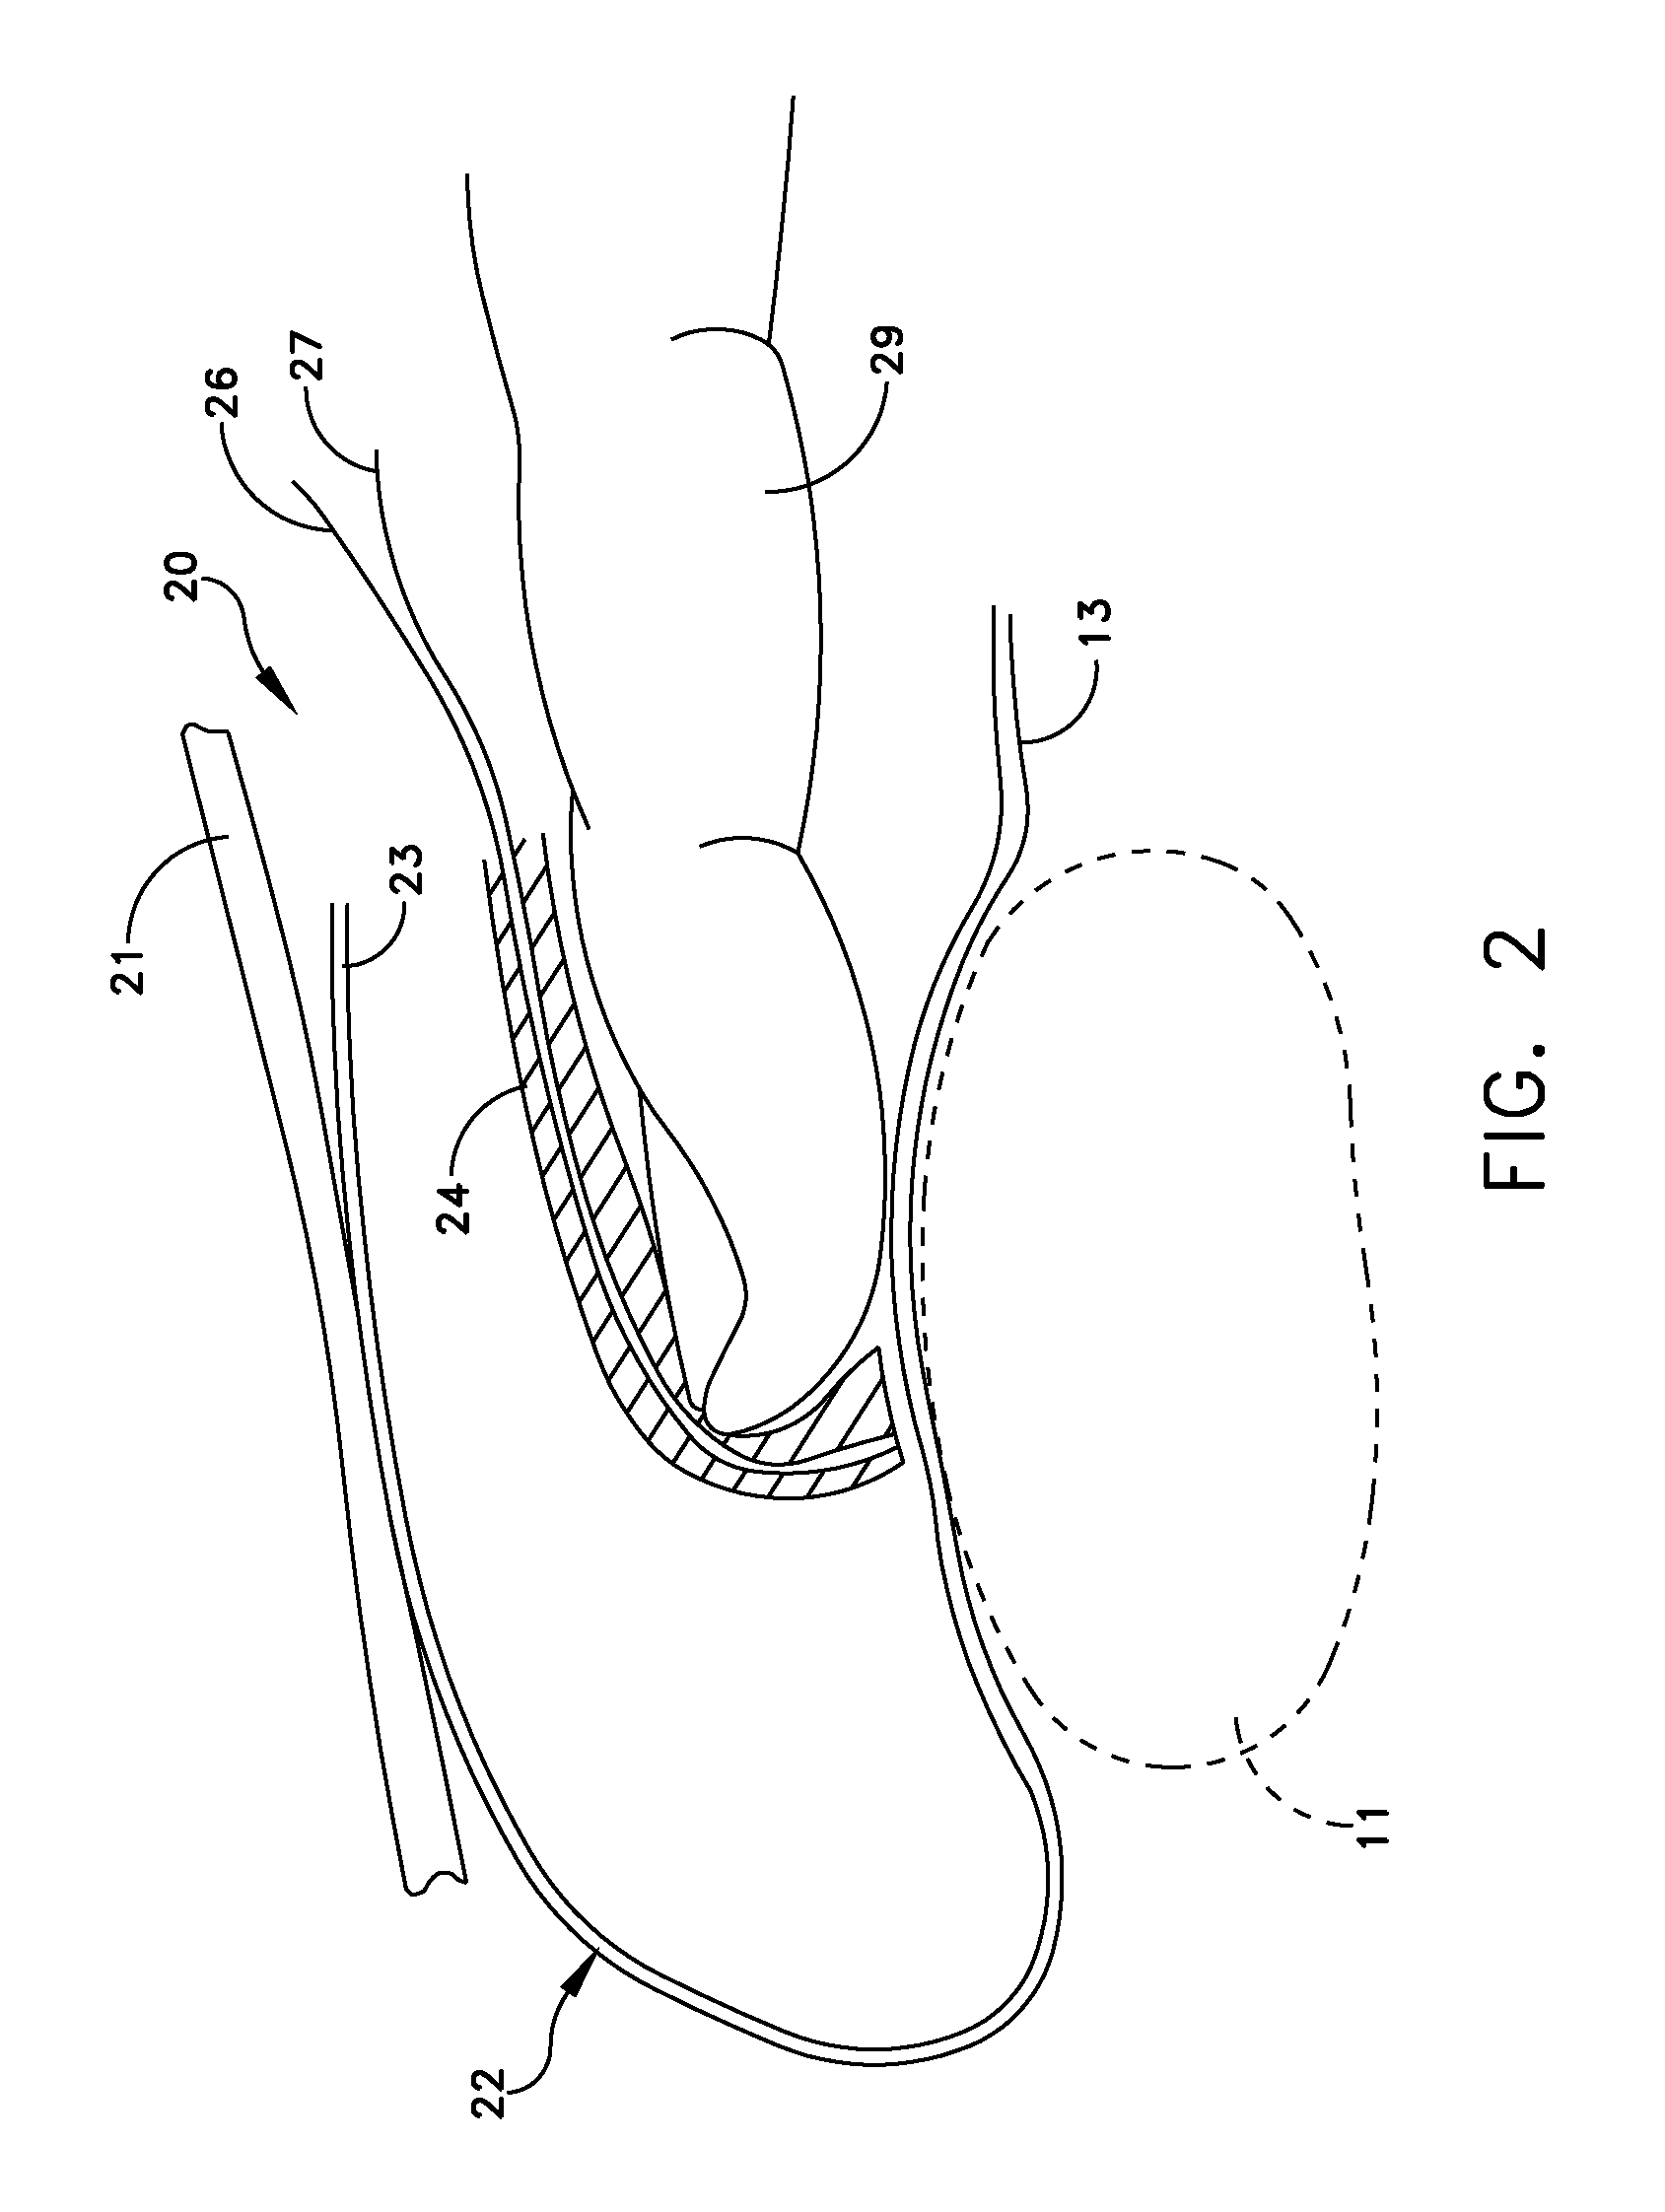 Apparatus and method for measuring the dimensions of the palpable surface of the prostate